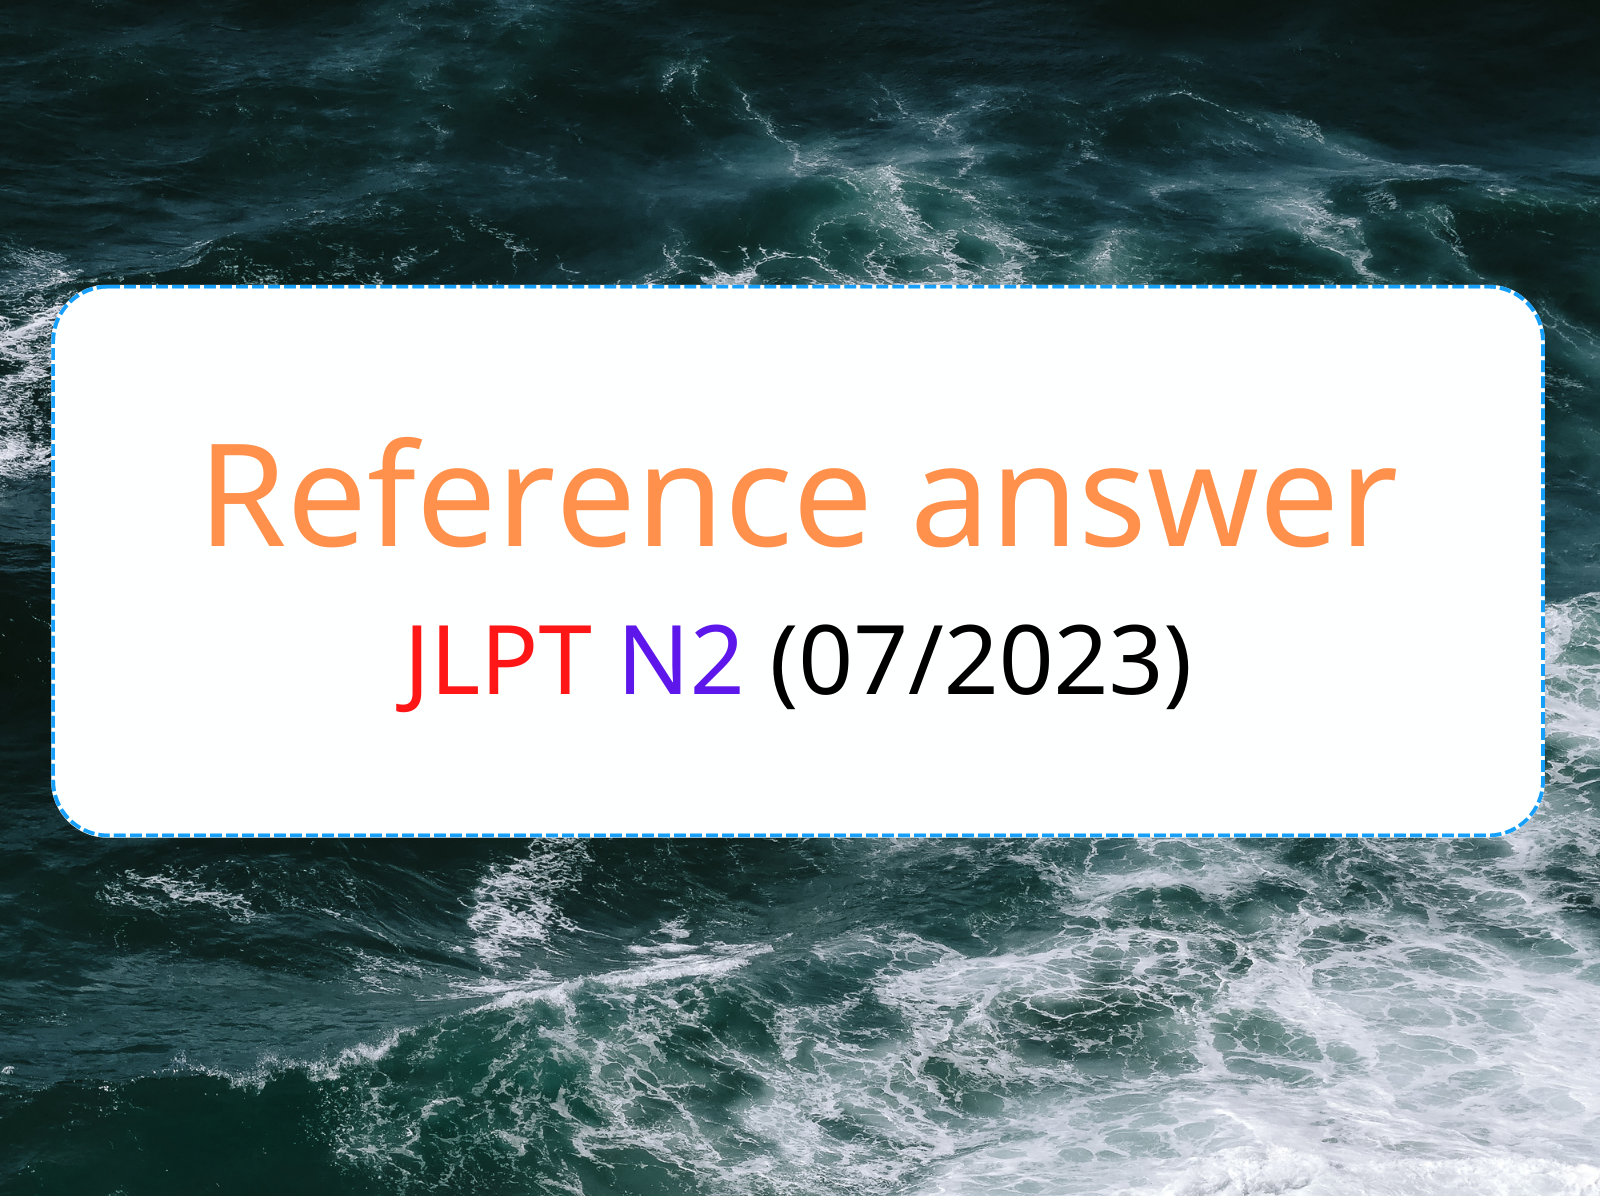 reference answer jlpt n2 07 2023